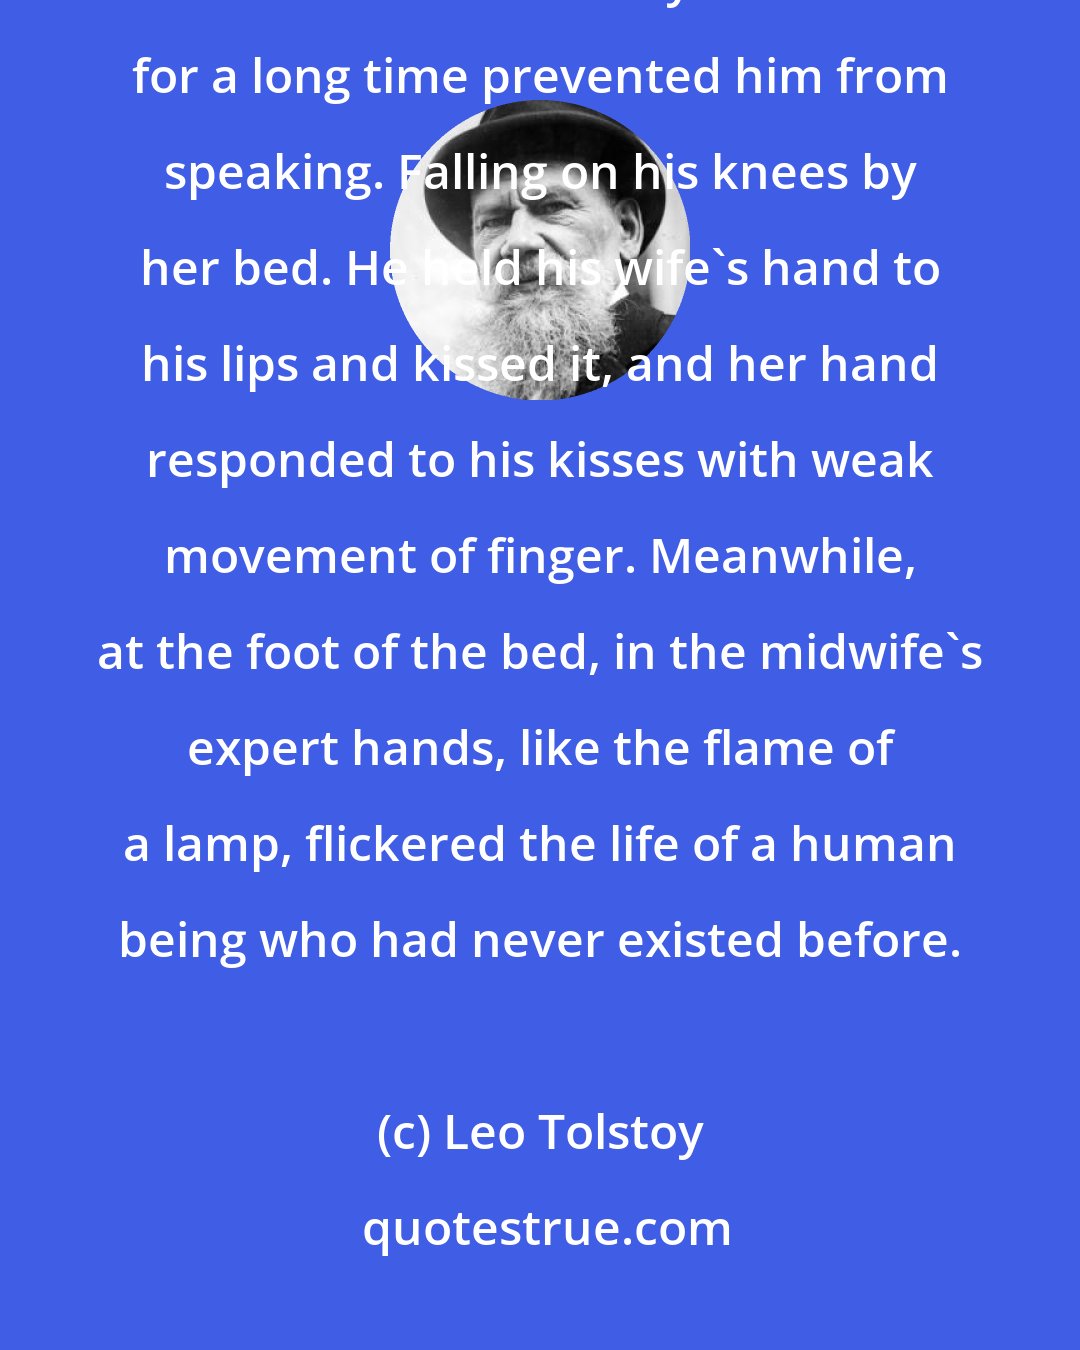 Leo Tolstoy: The sobs and tears of joy he had not foreseen rose with such force within him that his whole body shook and for a long time prevented him from speaking. Falling on his knees by her bed. He held his wife's hand to his lips and kissed it, and her hand responded to his kisses with weak movement of finger. Meanwhile, at the foot of the bed, in the midwife's expert hands, like the flame of a lamp, flickered the life of a human being who had never existed before.